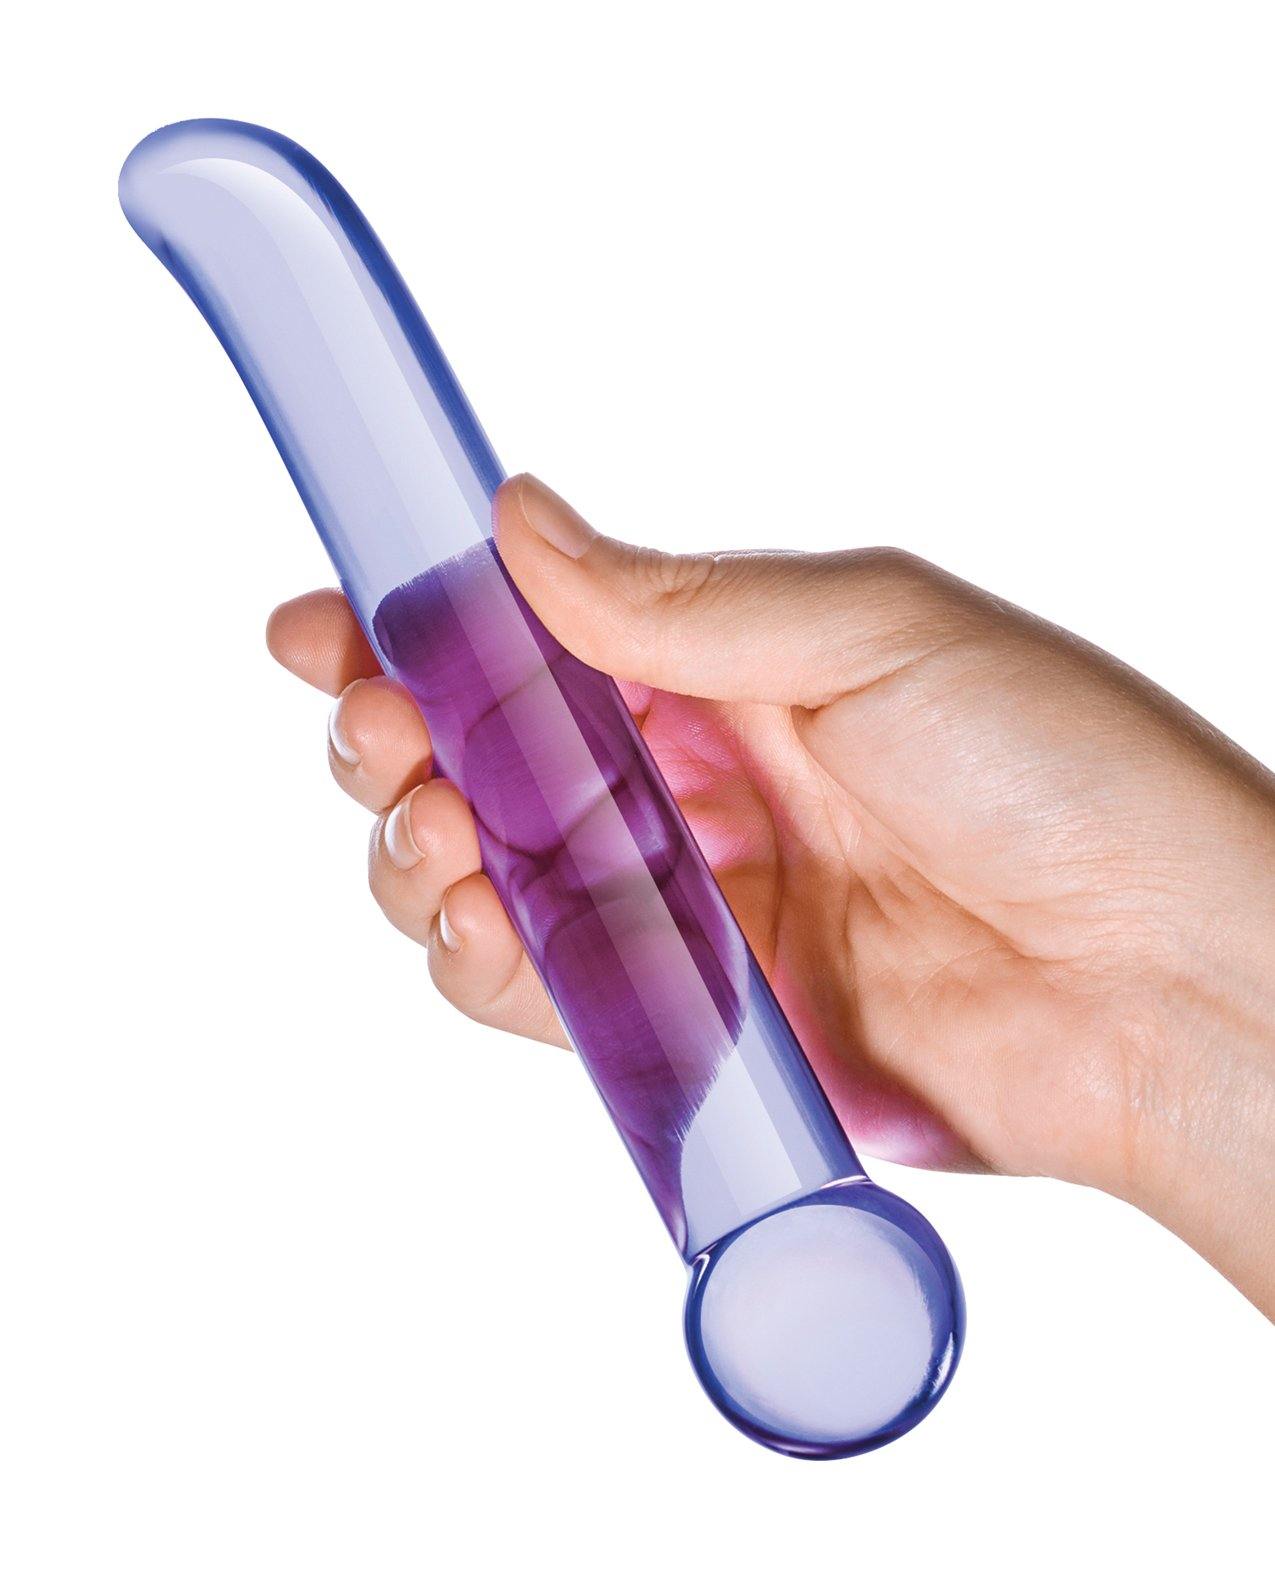 Glas G Spot Tickler - Buy At Luxury Toy X - Free 3-Day Shipping